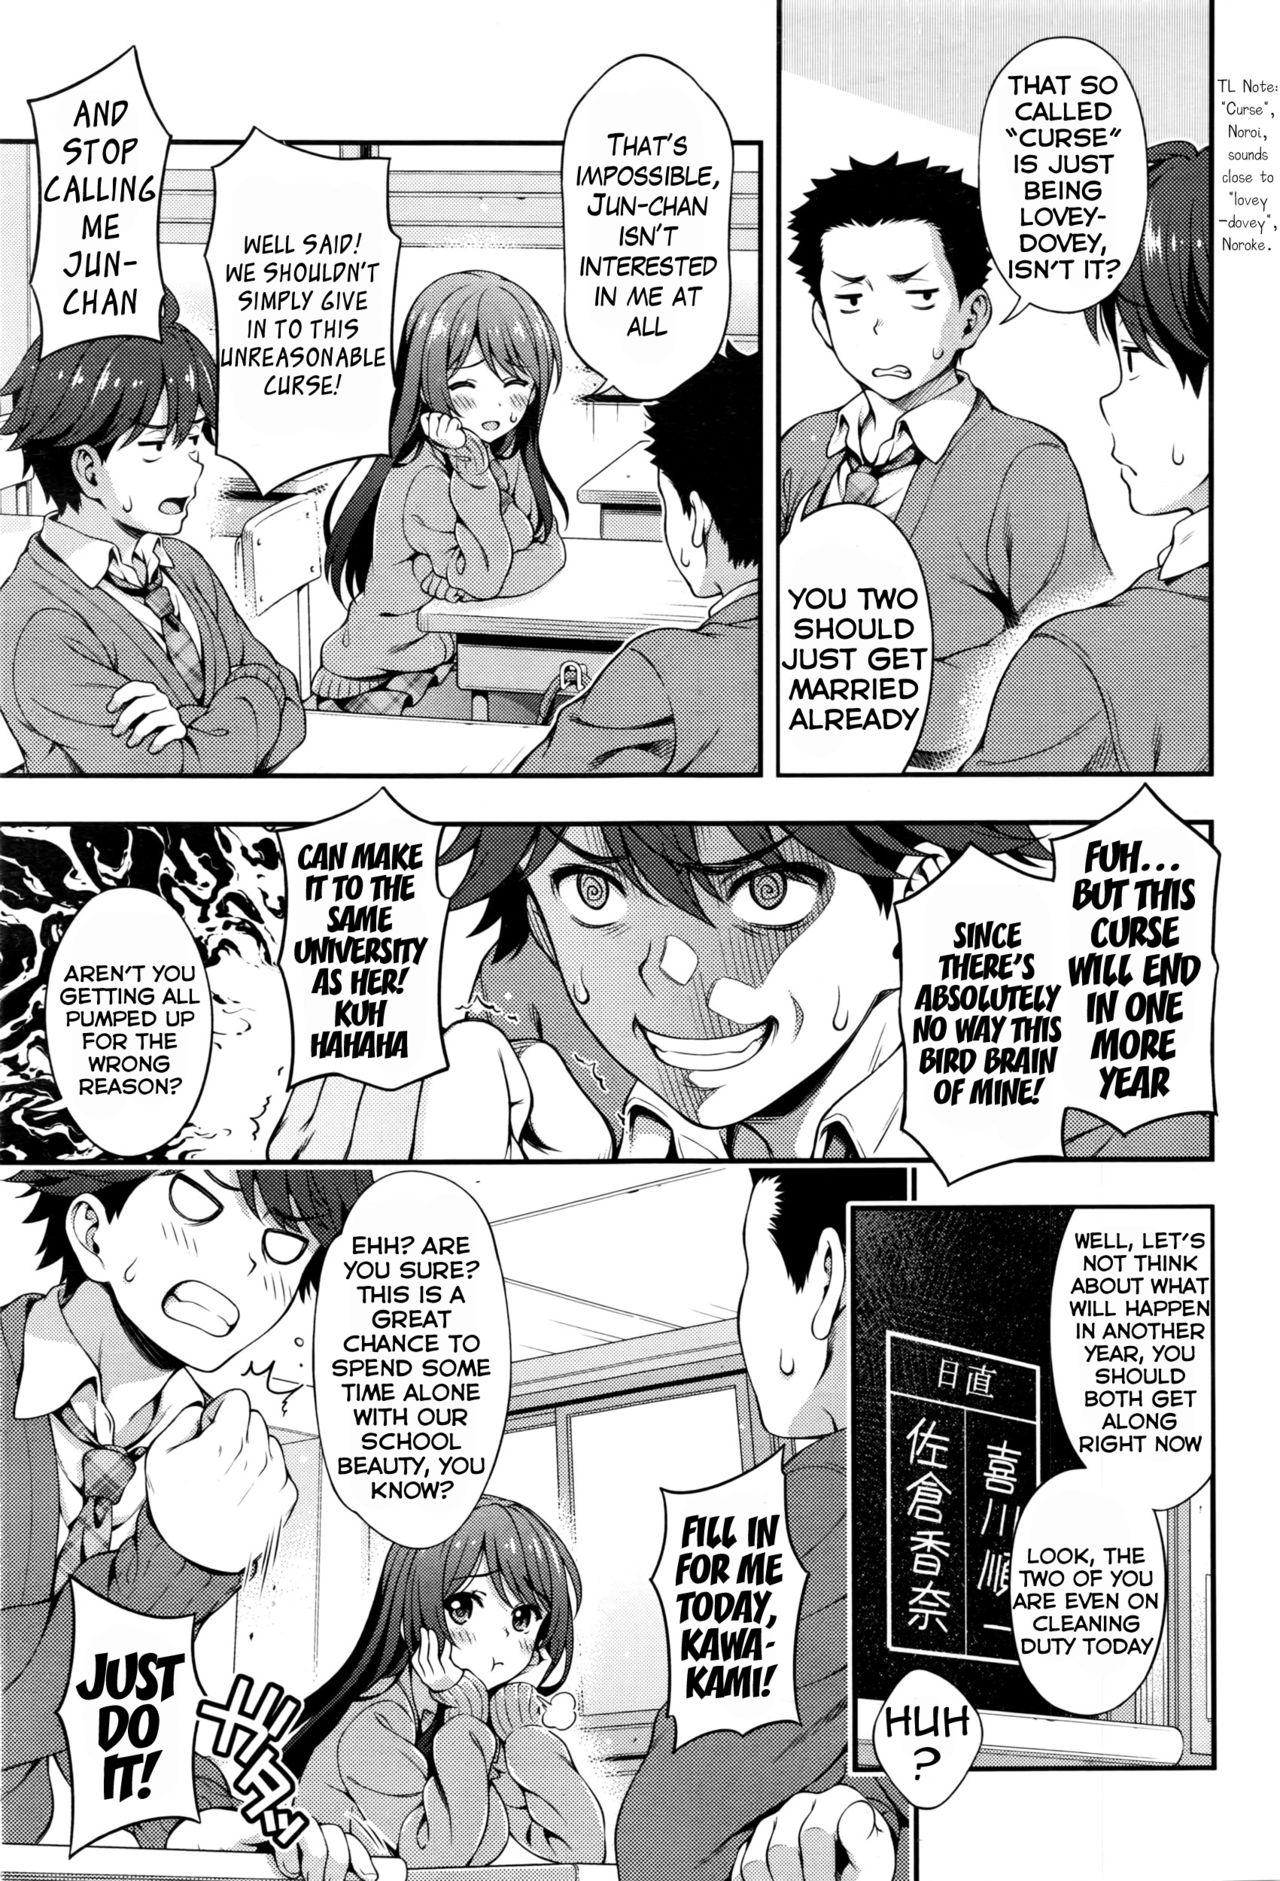 White Chick Akai Ito no Noroi | The Red String's Curse Titties - Page 5